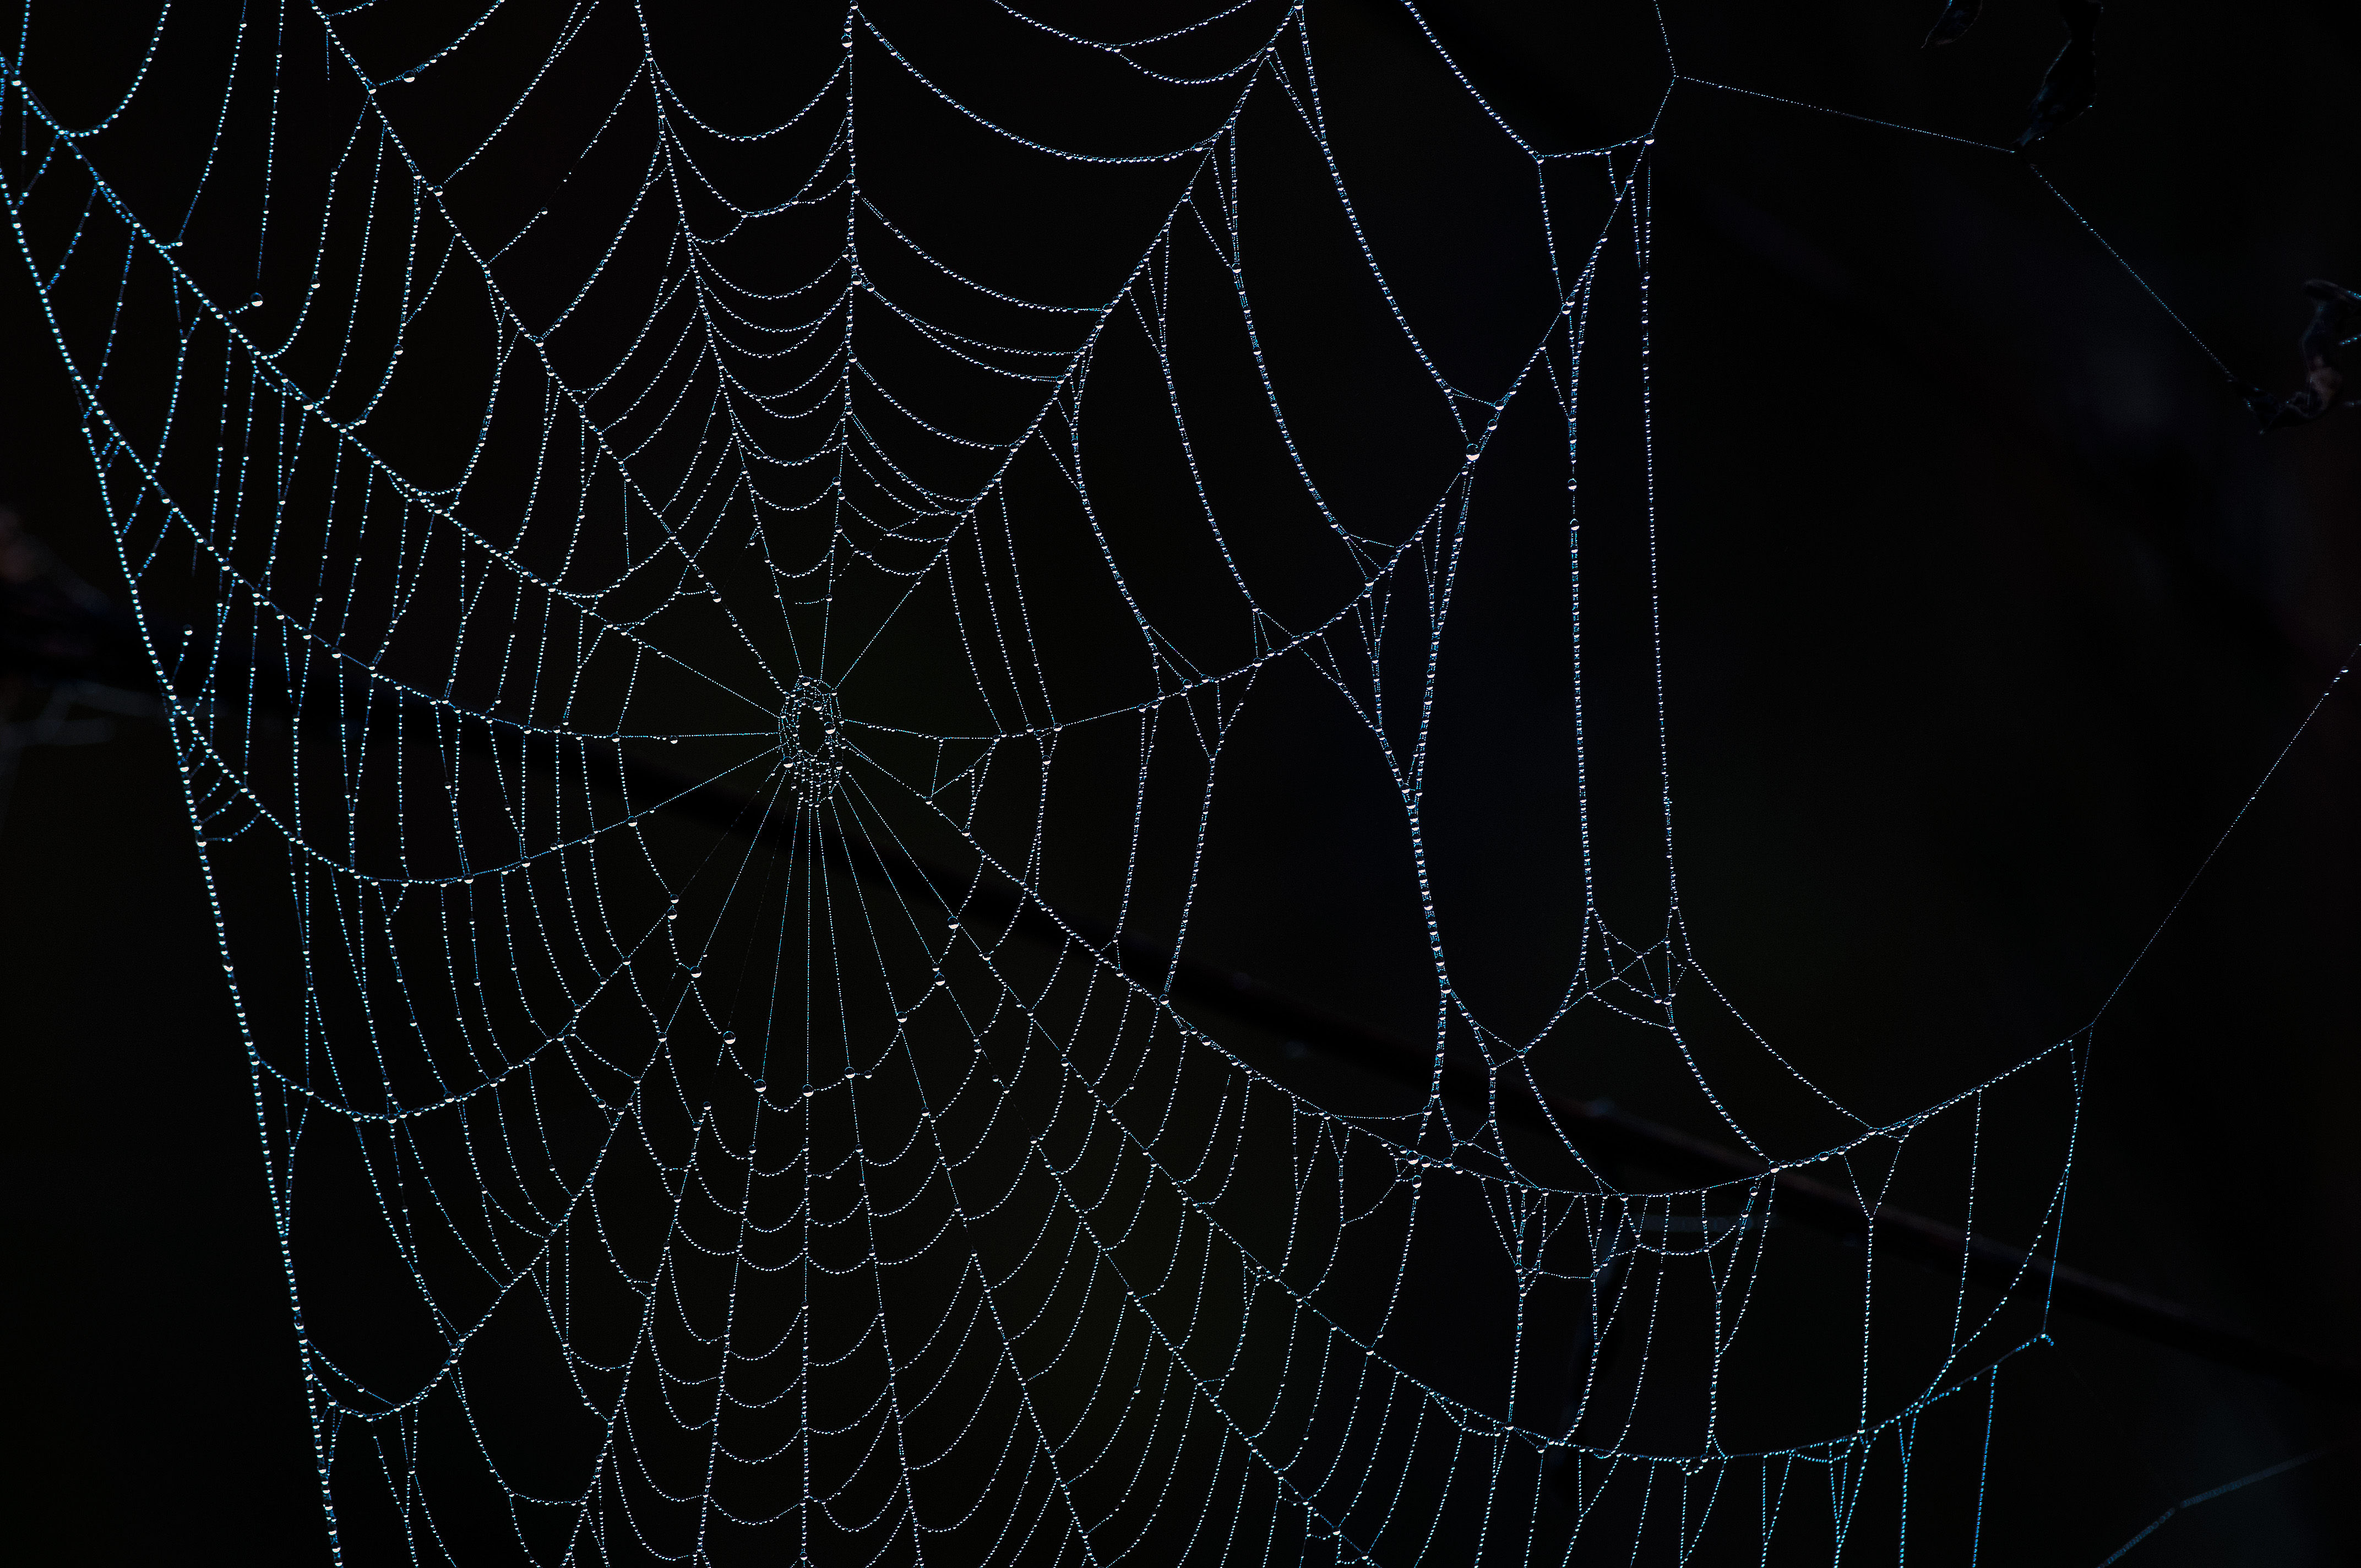 Spider Web With Droplets.jpg